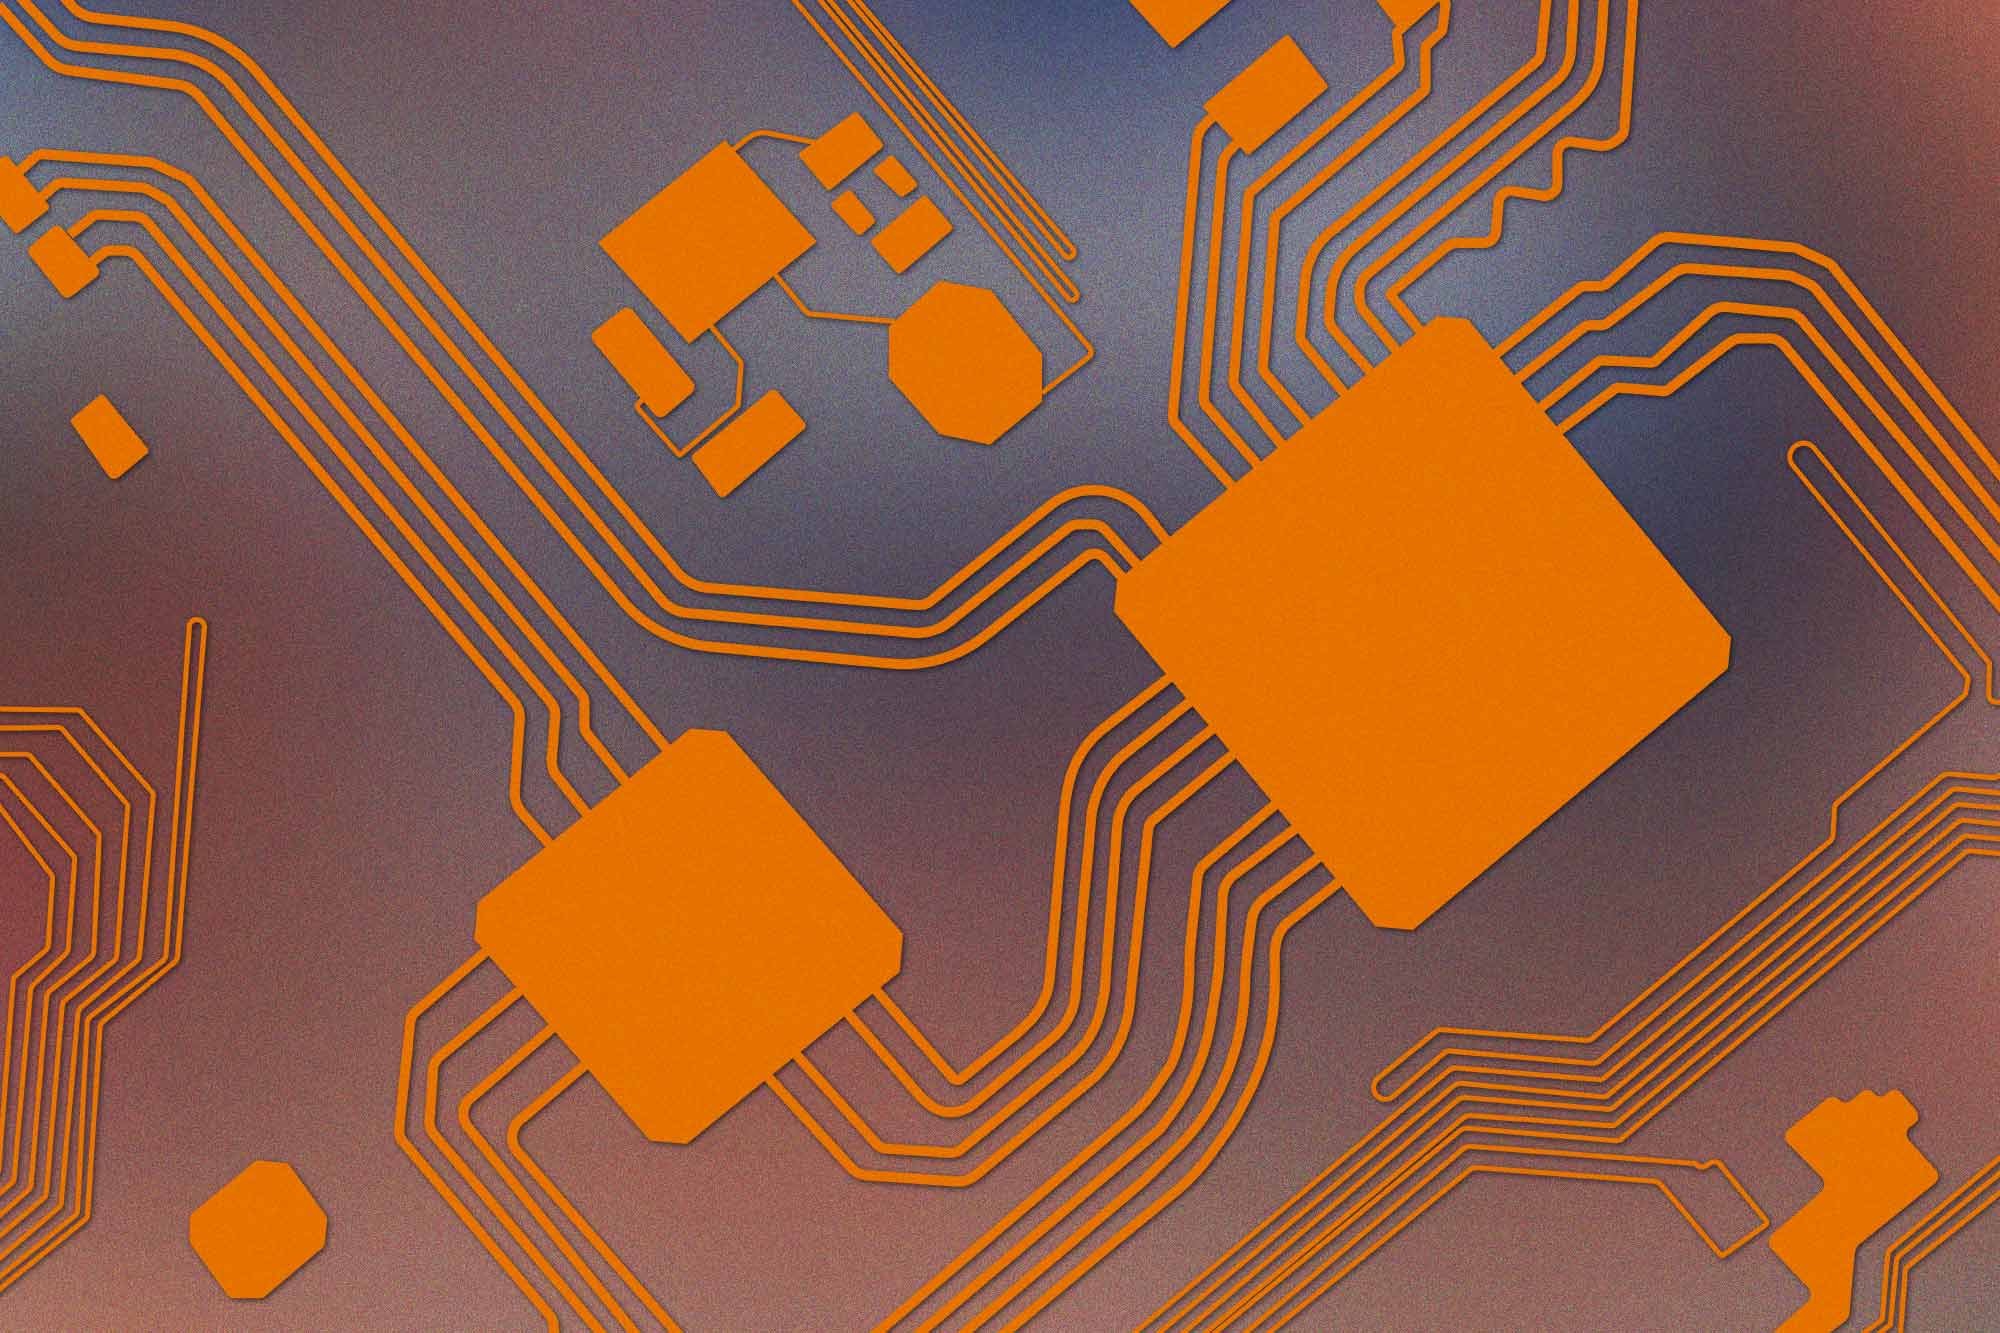 Orange blocks and lines representing a microchip